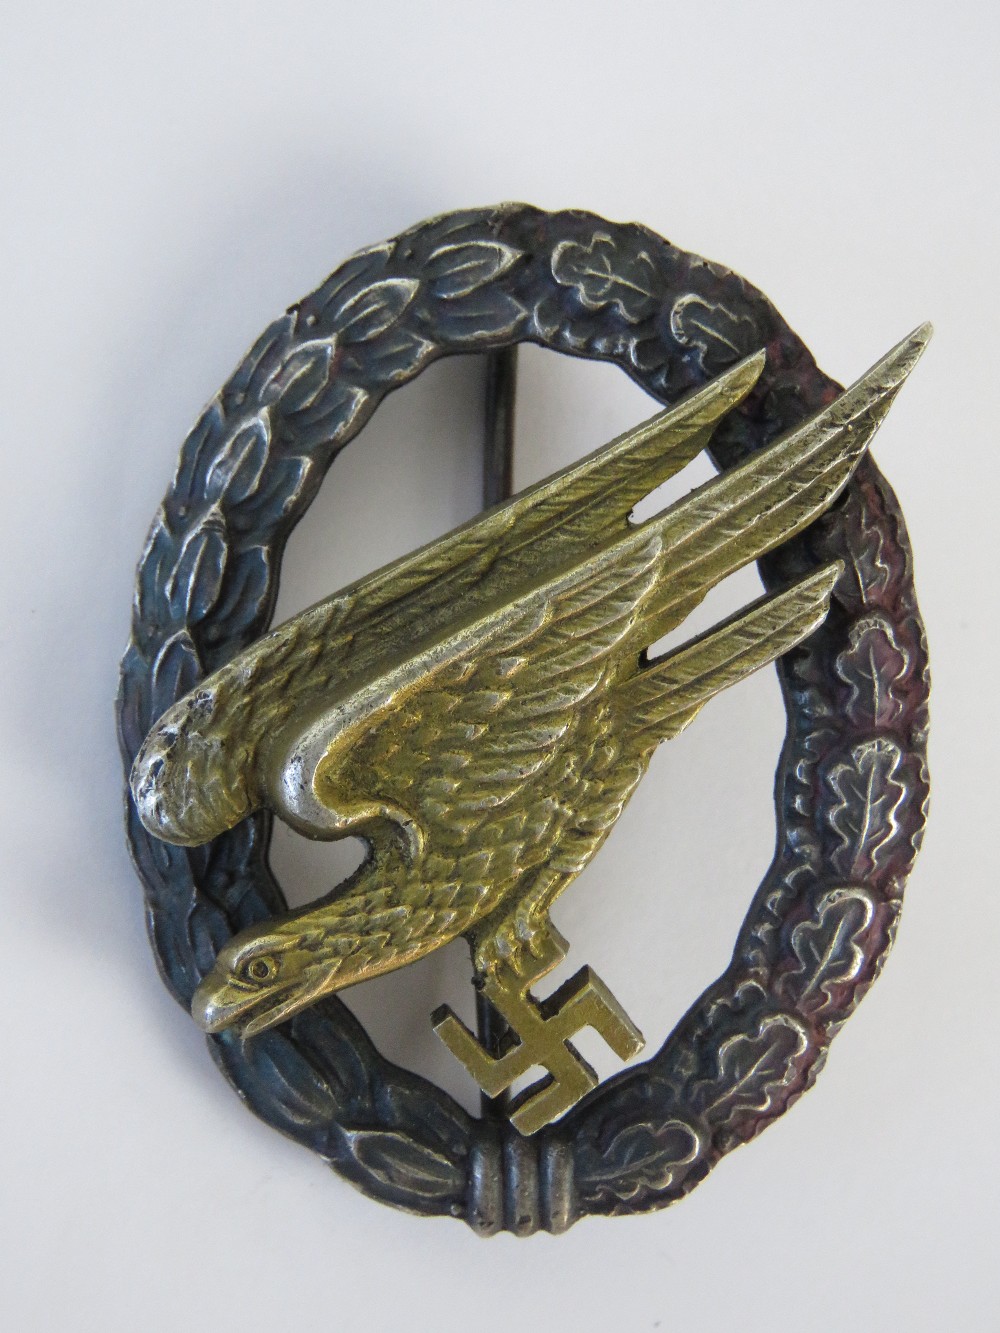 A WWII German Paratrooper 'Gold Eagle' badge.